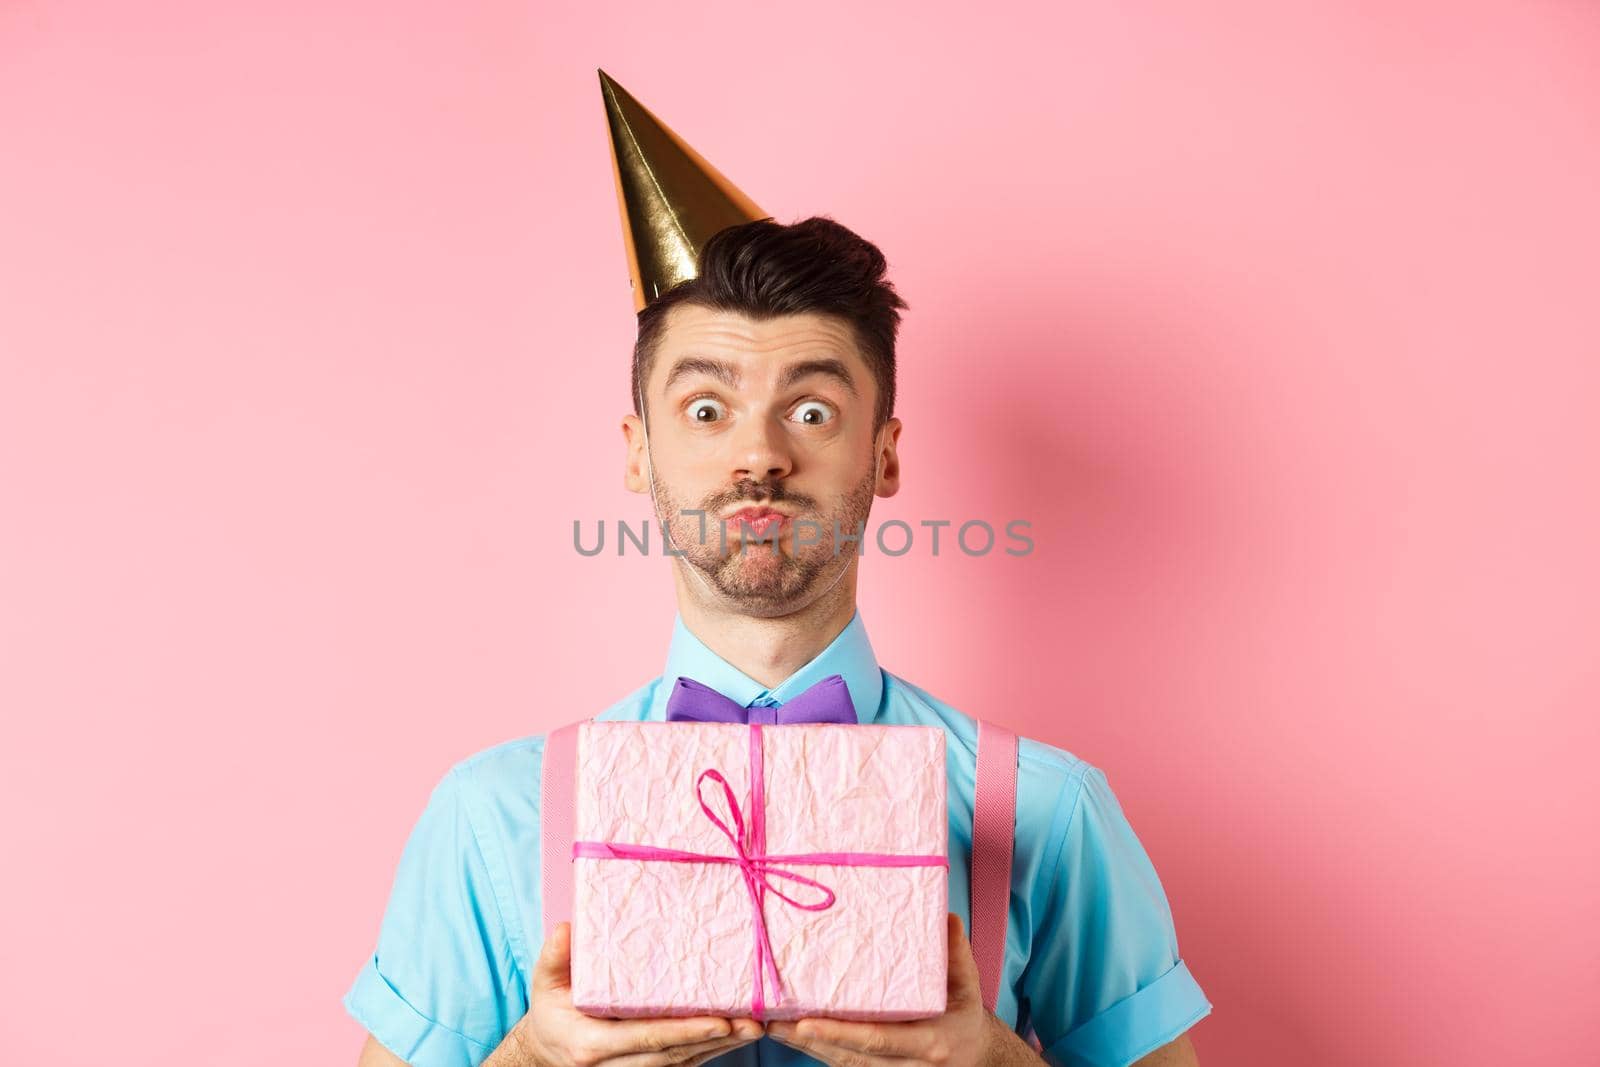 Holidays and celebration concept. Funny guy staring at camera surprised, wearing party hat, holding birthday gift and holding breath, pouting at camera, pink background.